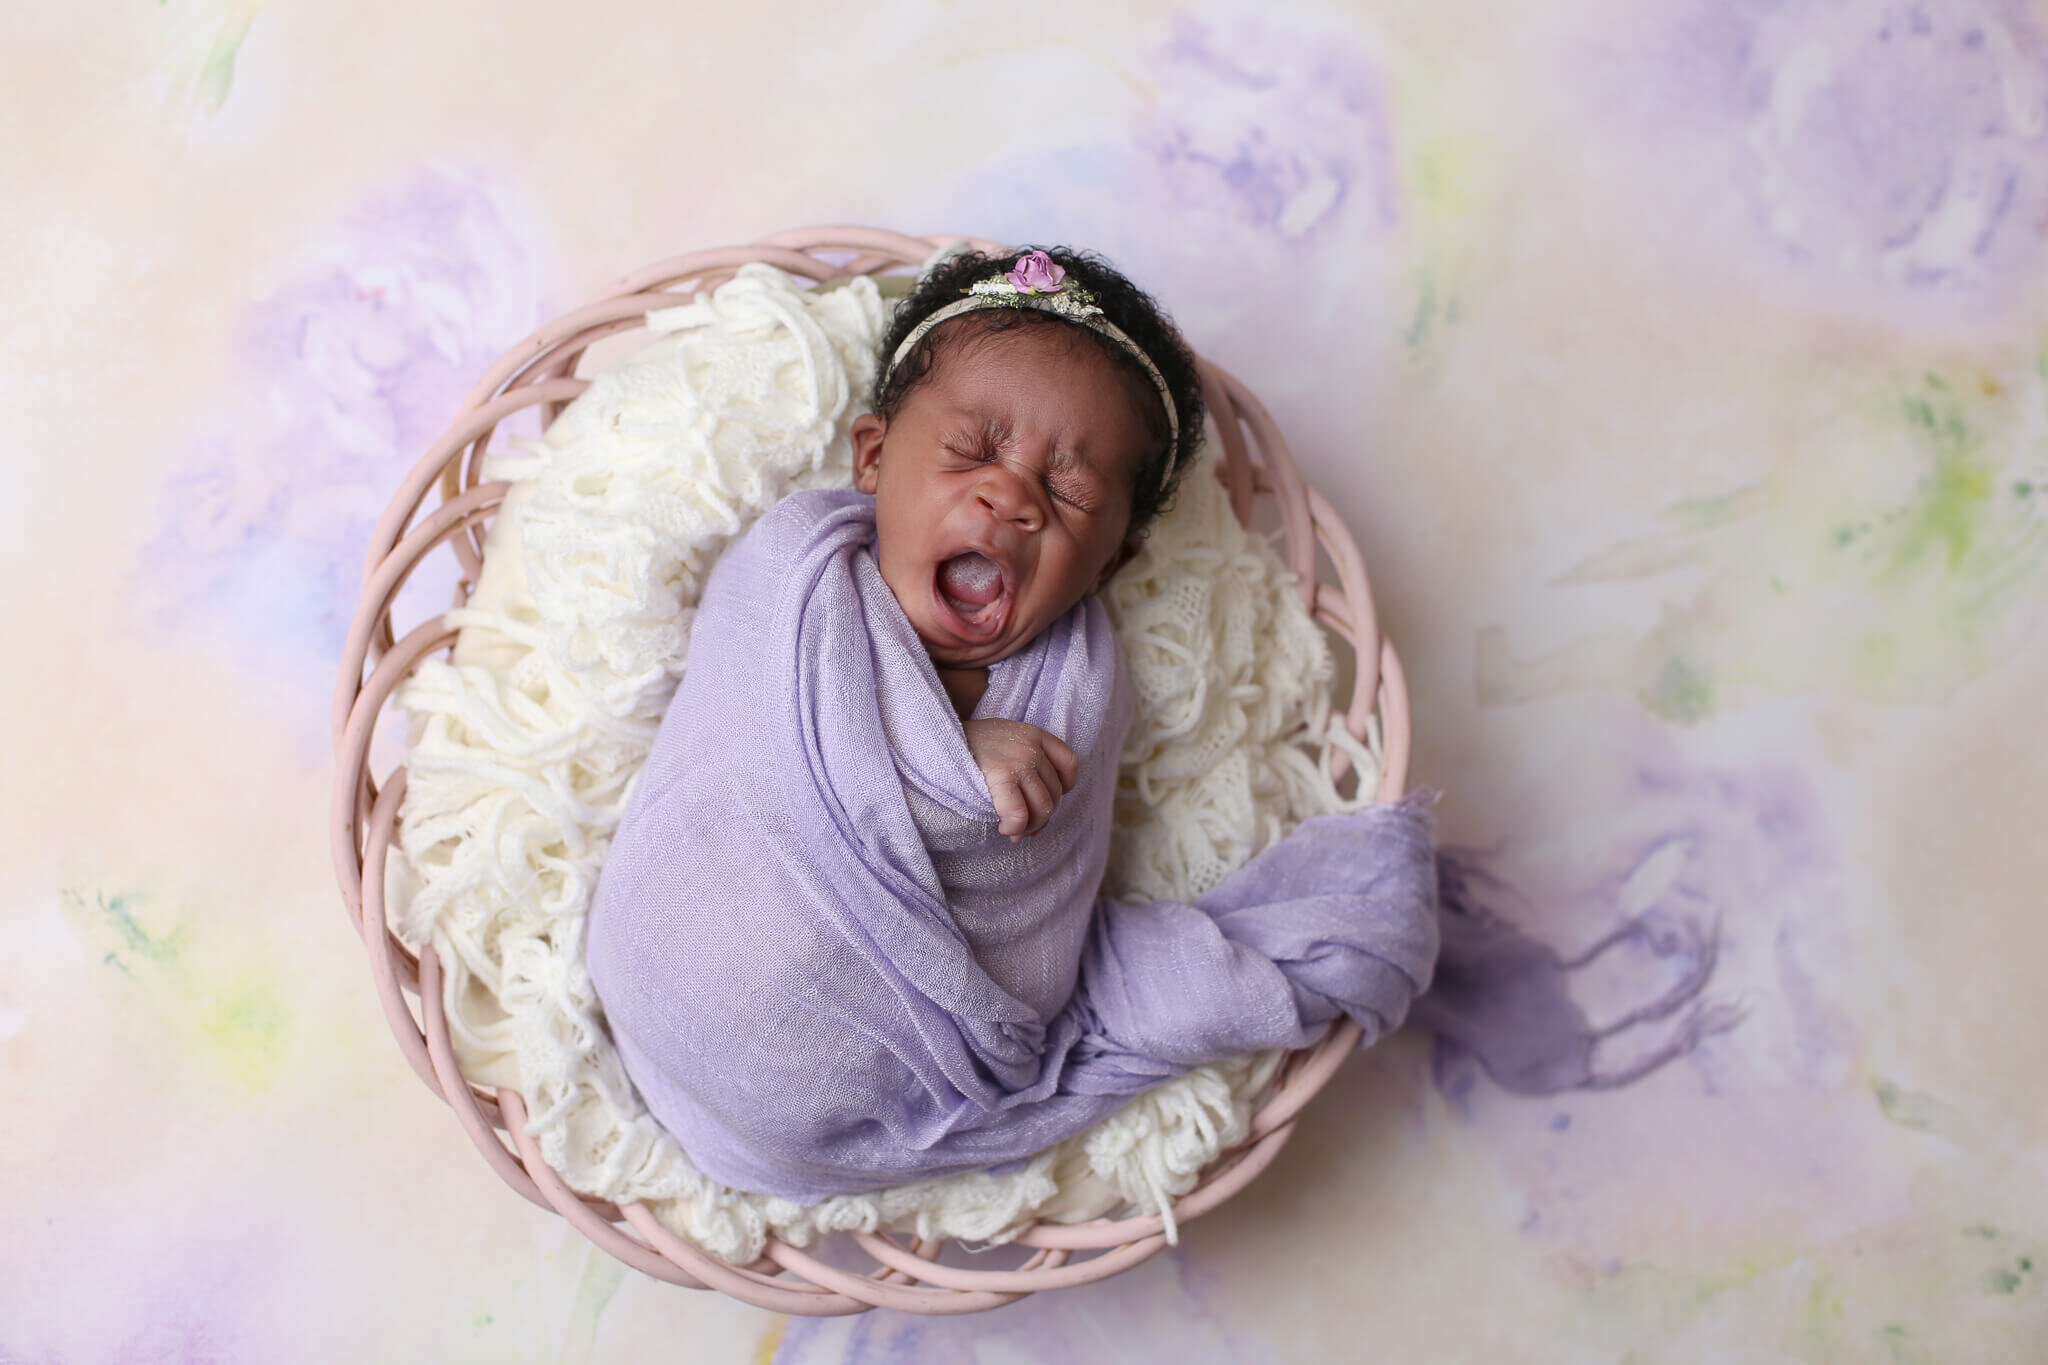  An image of a newborn baby in her flowered headband, having a big yawn as she lies tightly wrapped in gauze on top of a soft cushion of yarn in a basket from a newborn photo session 